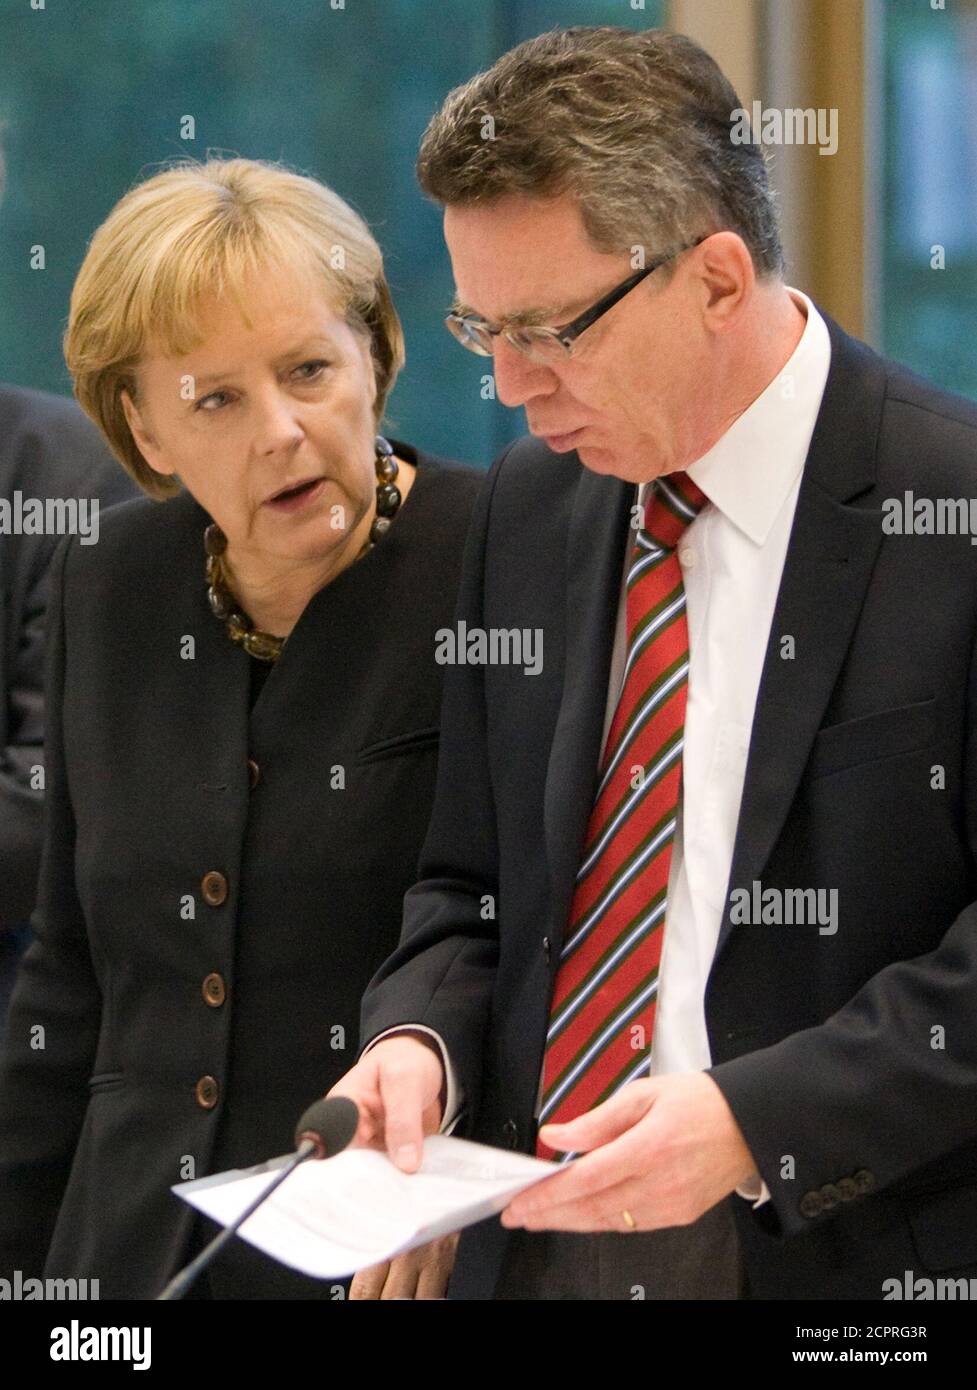 German Chancellor and leader of the Christian Democratic Union (CDU) party, Angela Merkel (L) talks with Chief of the Chancellor's Office Thomas de Maiziere before coalitions talks in Berlin October 8, 2009.   REUTERS/Thomas Peter (GERMANY POLITICS) Stock Photo